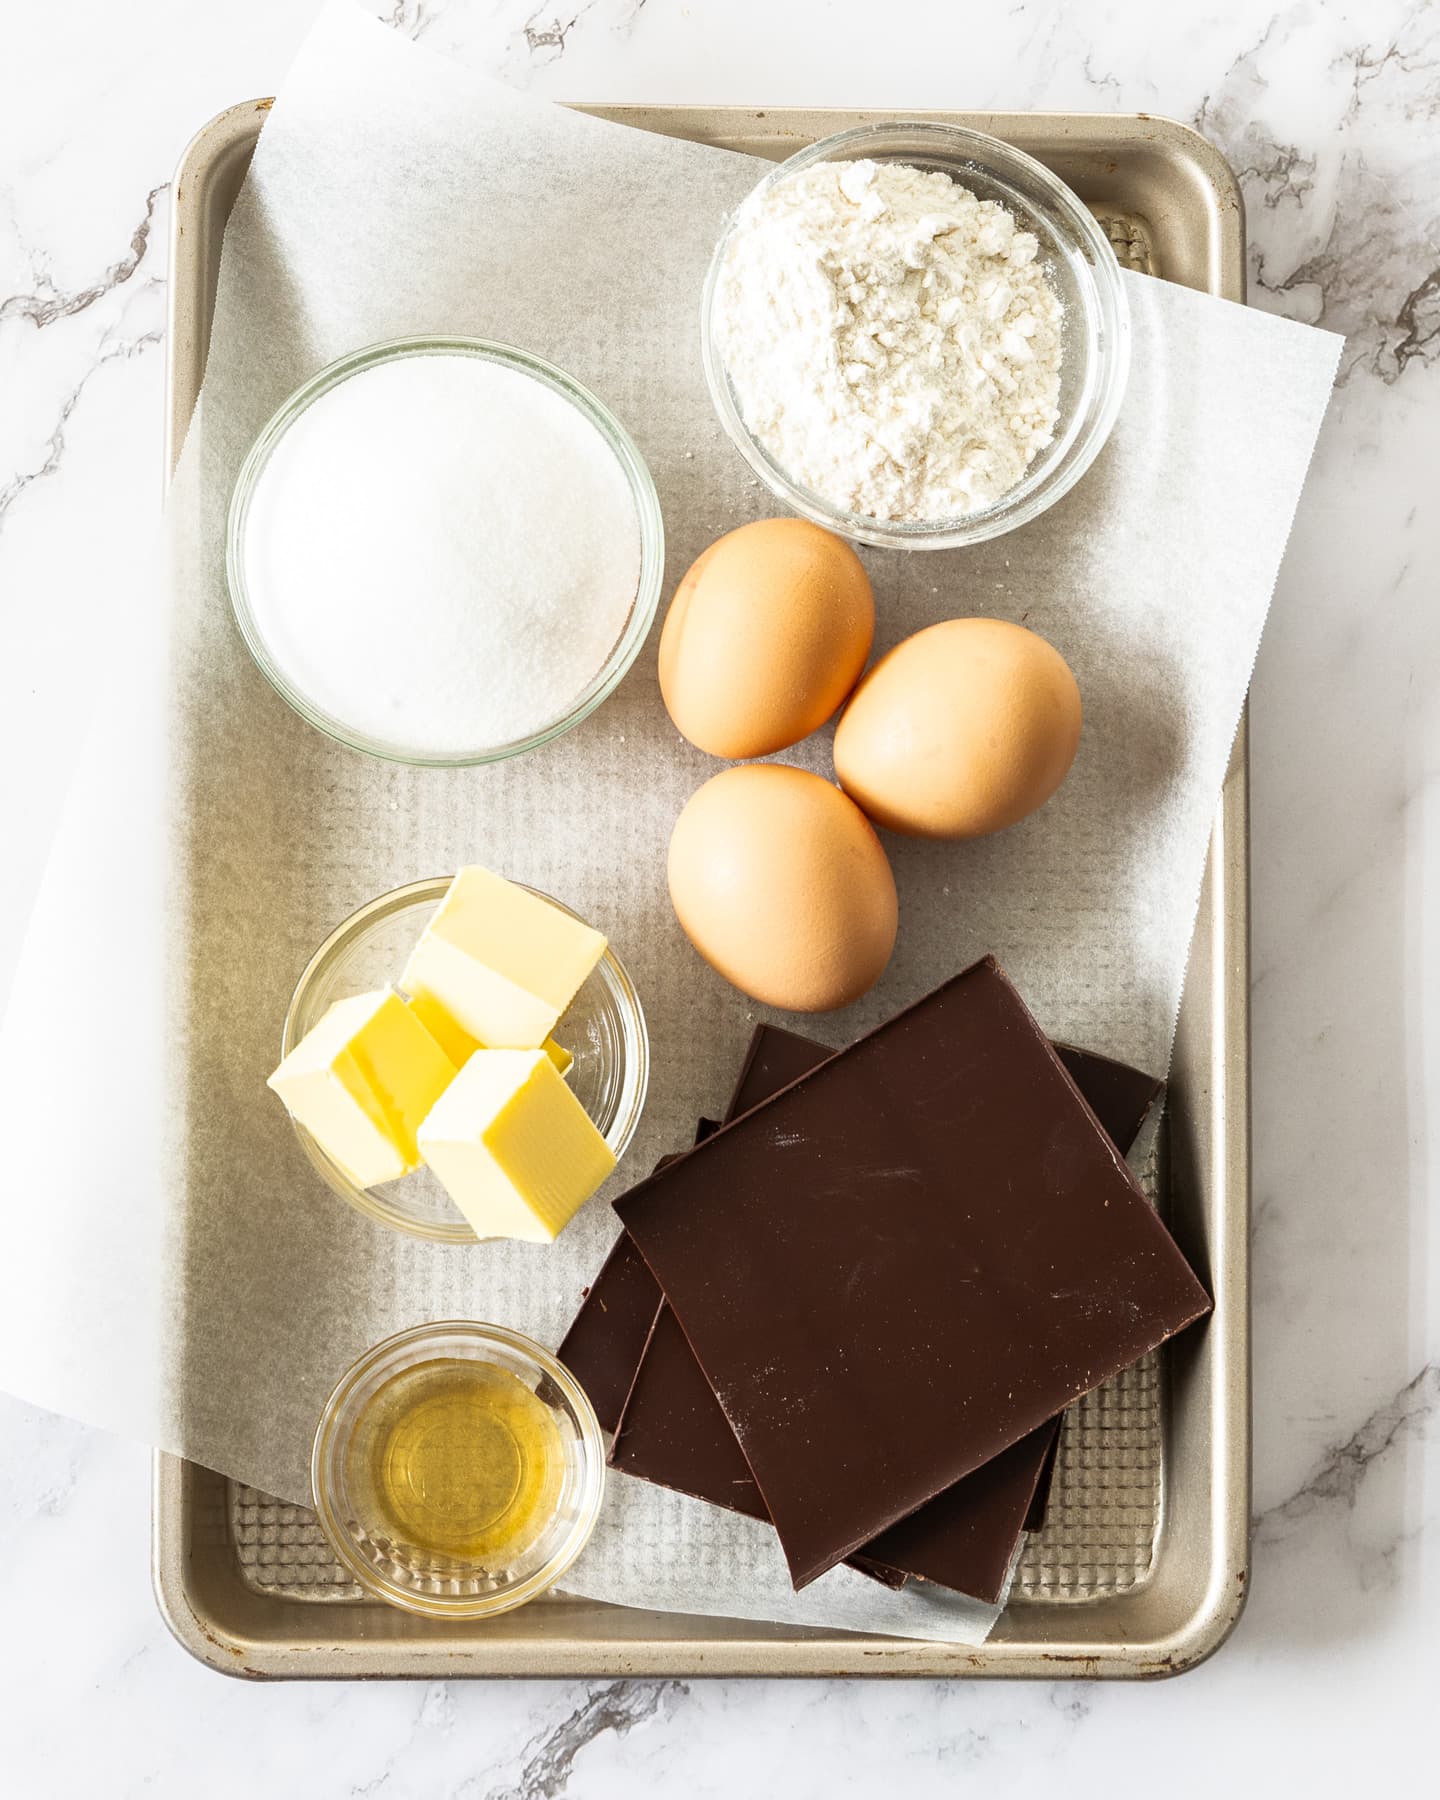 Ingredients for chocolate fondant on a baking tray.